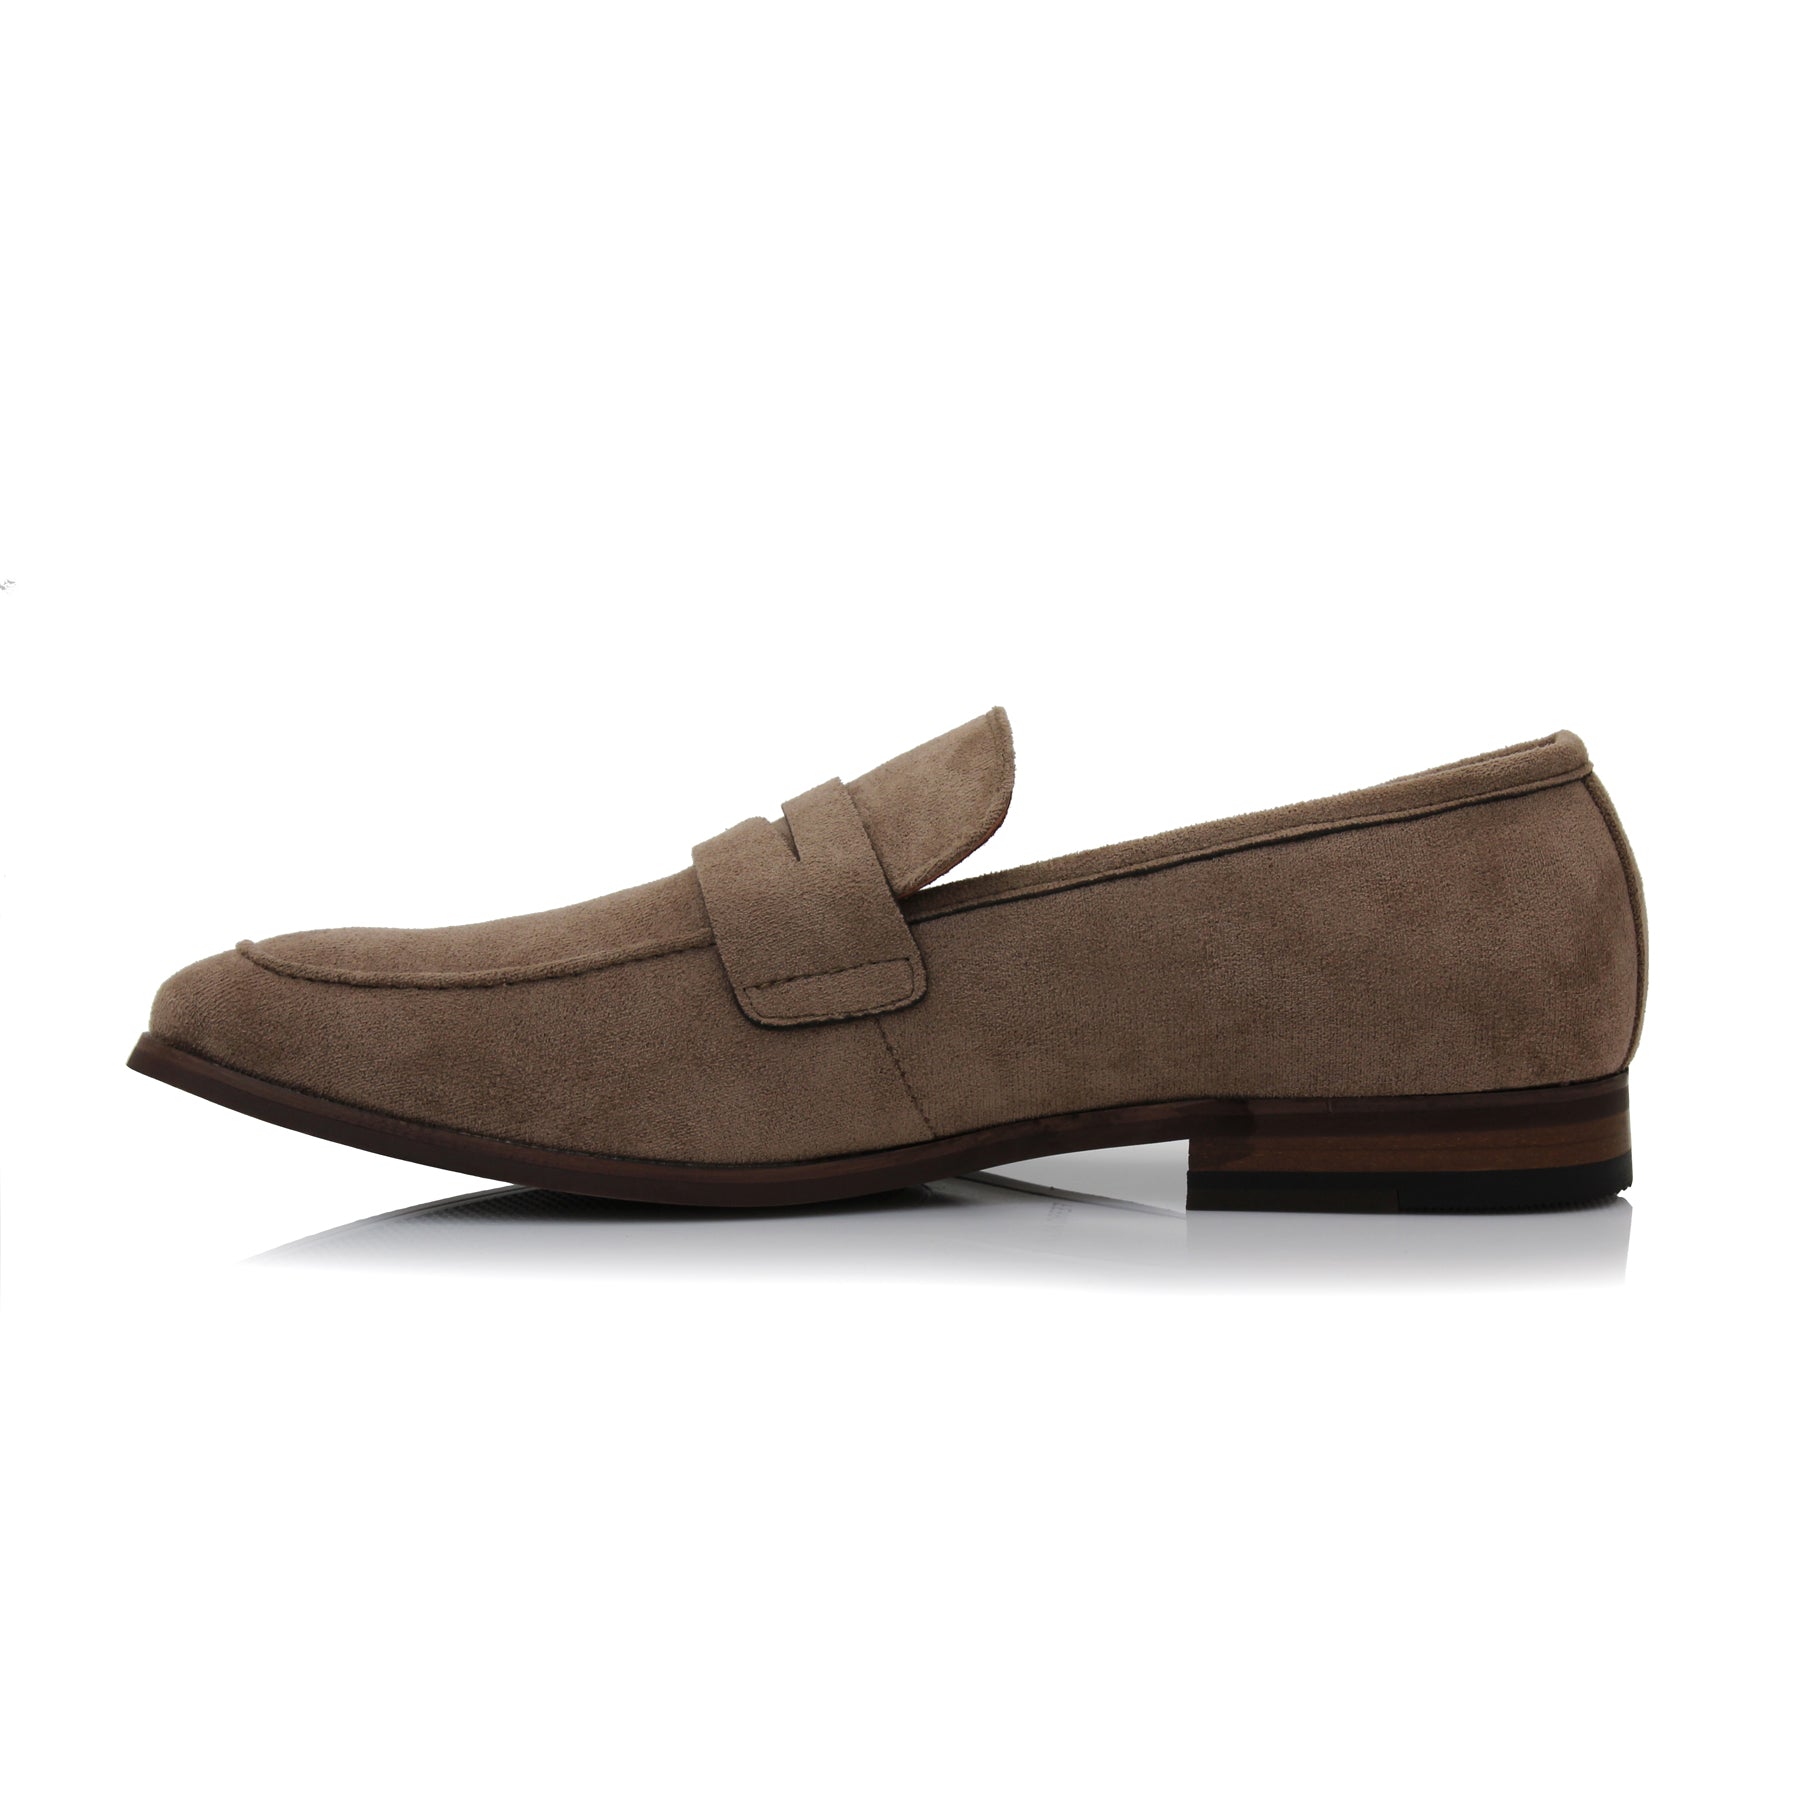 Suede Penny Loafers | Dylan by Ferro Aldo | Conal Footwear | Inner Side Angle View